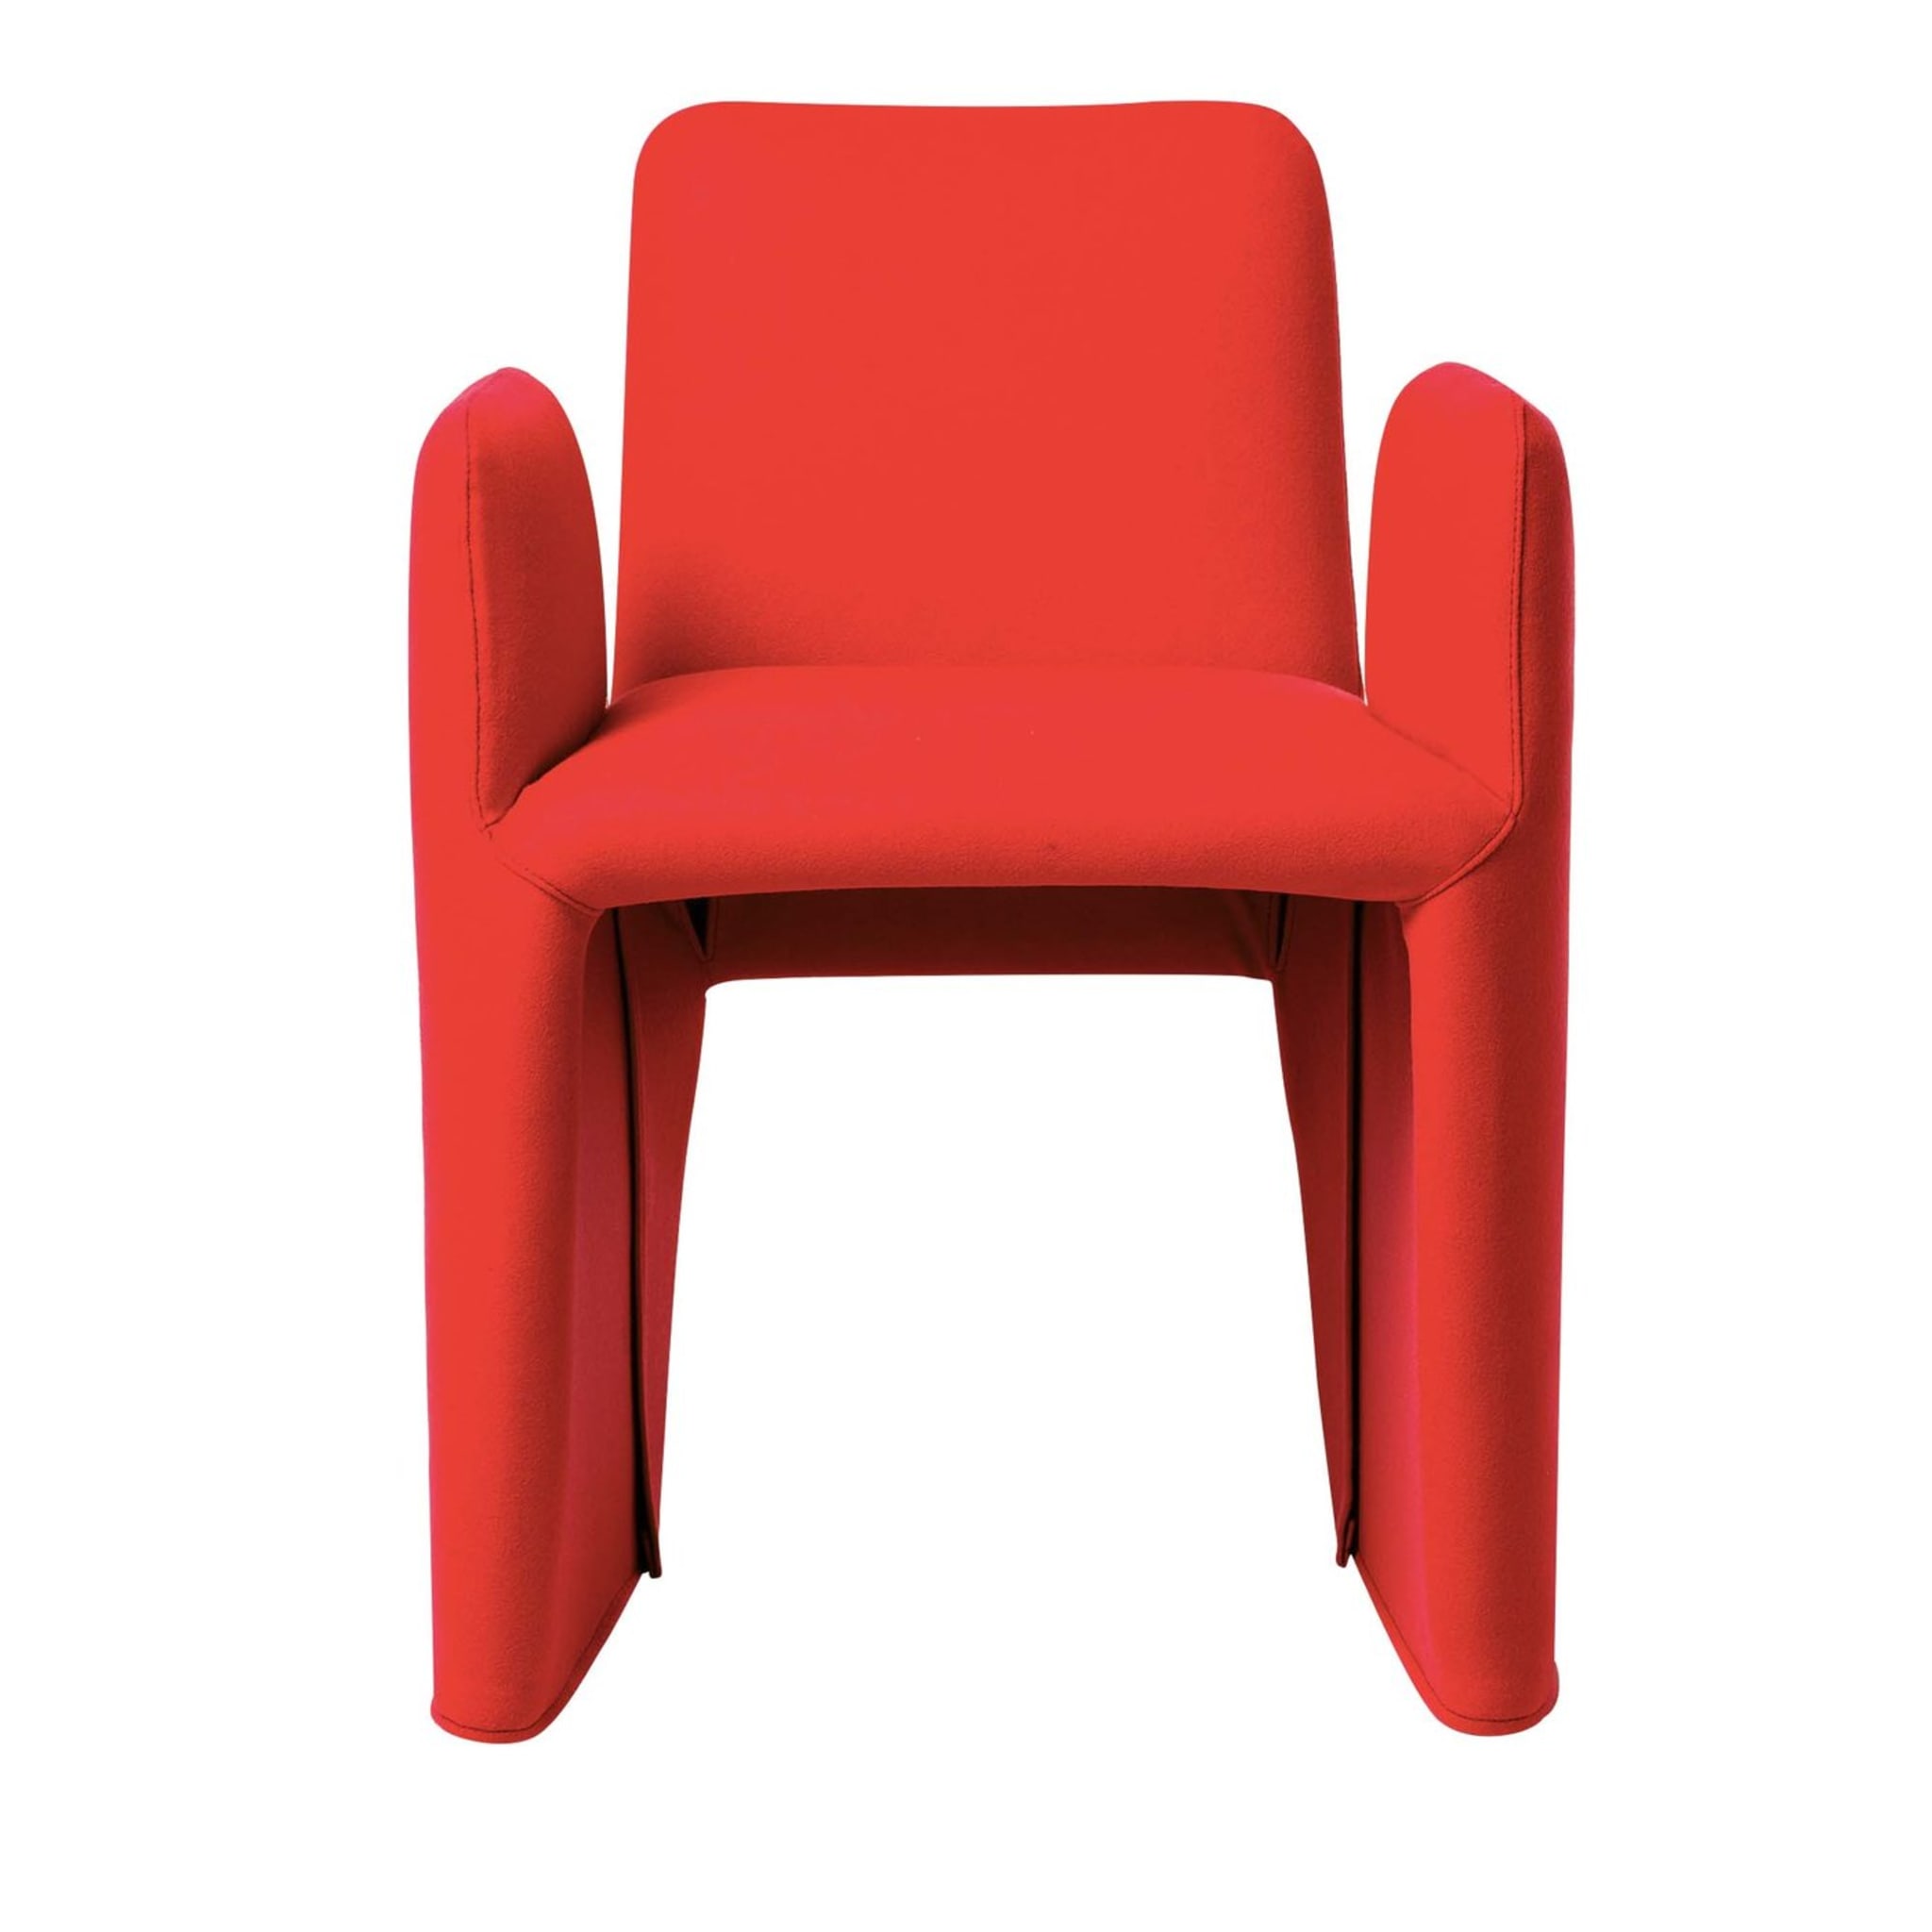 Nova OW Chair With Armrests by Federico Carandini - Main view